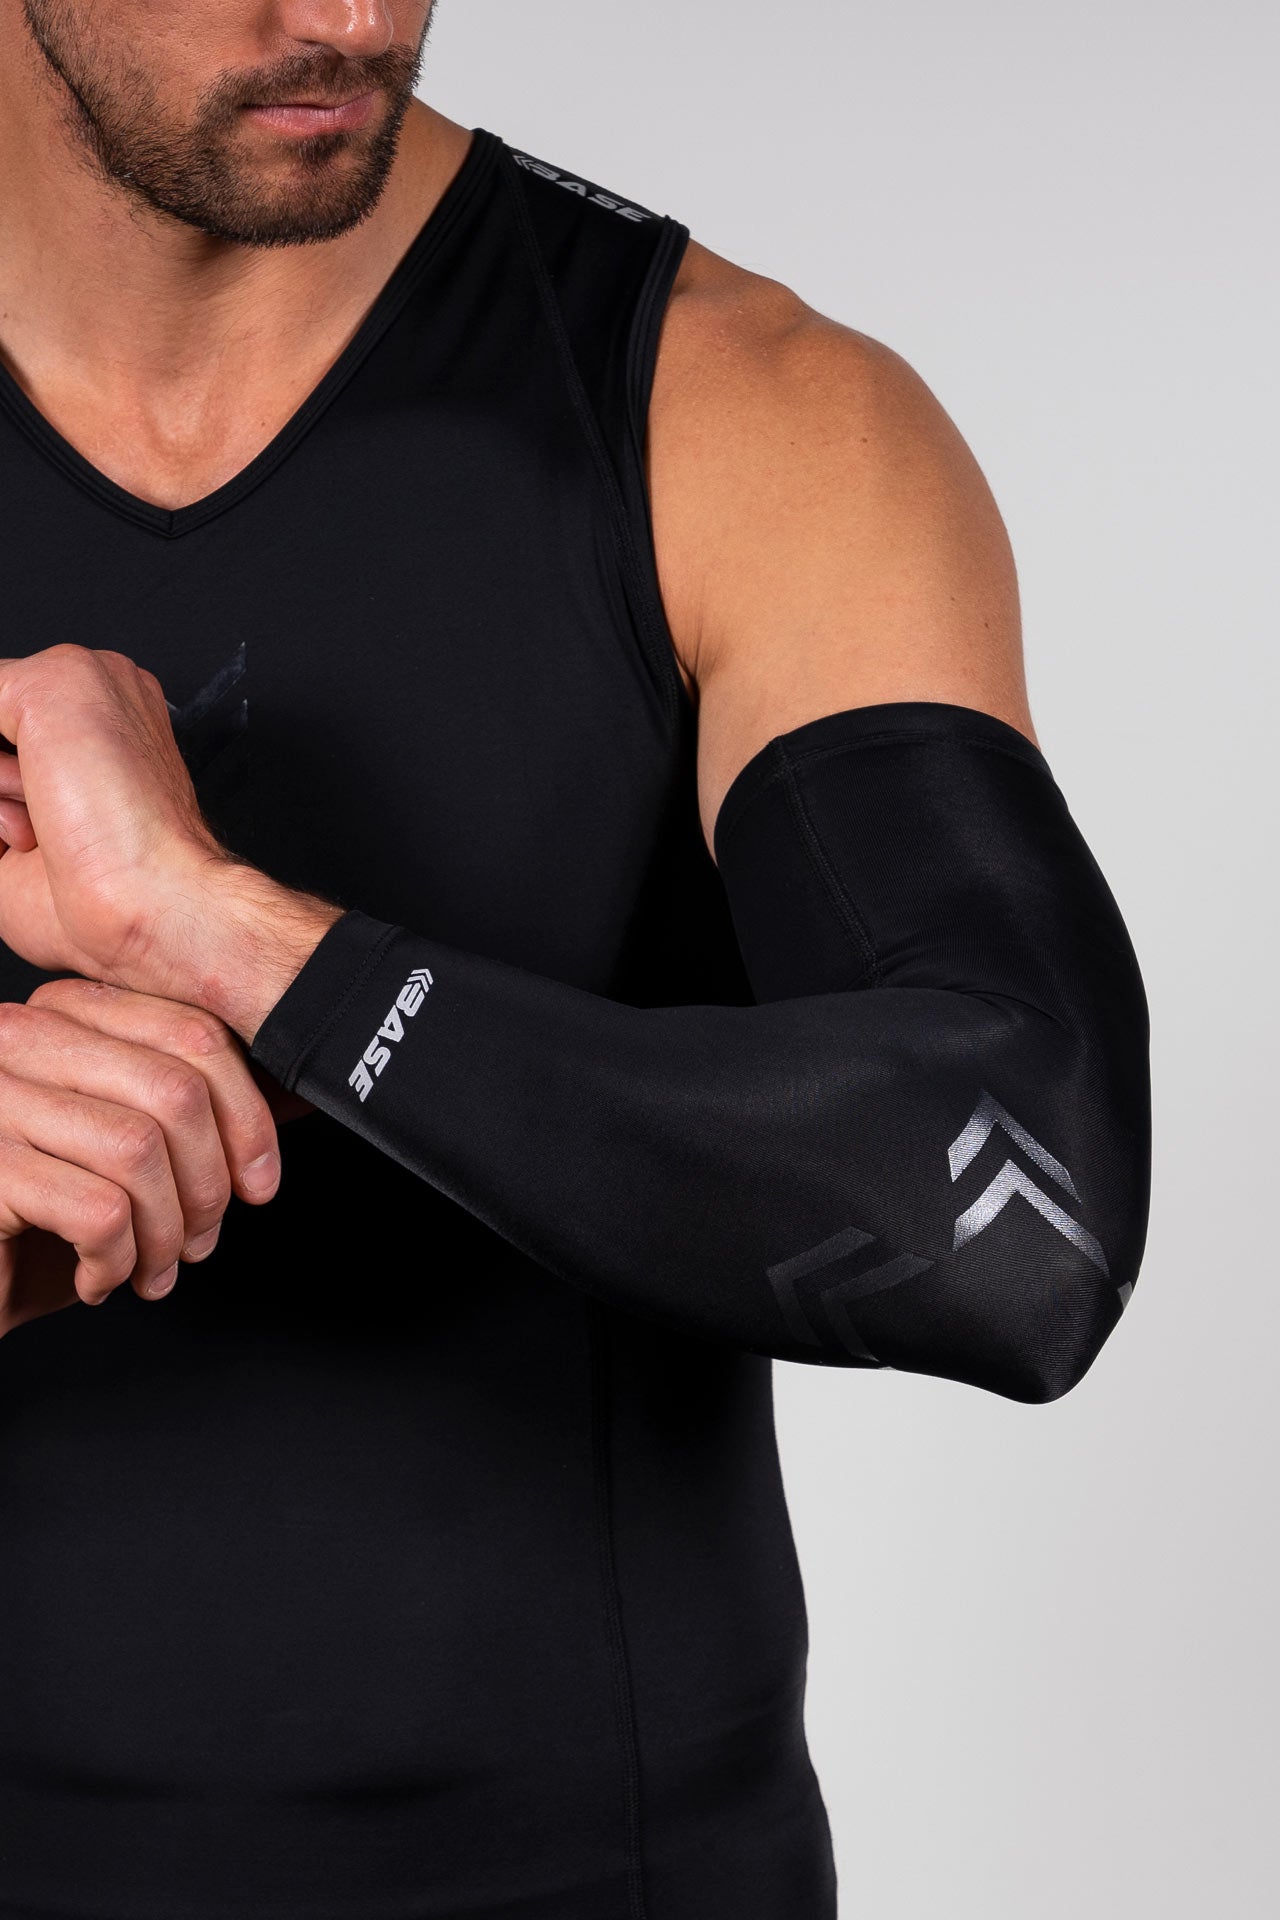 Compression Arm Sleeves - Arm Compression Sleeves